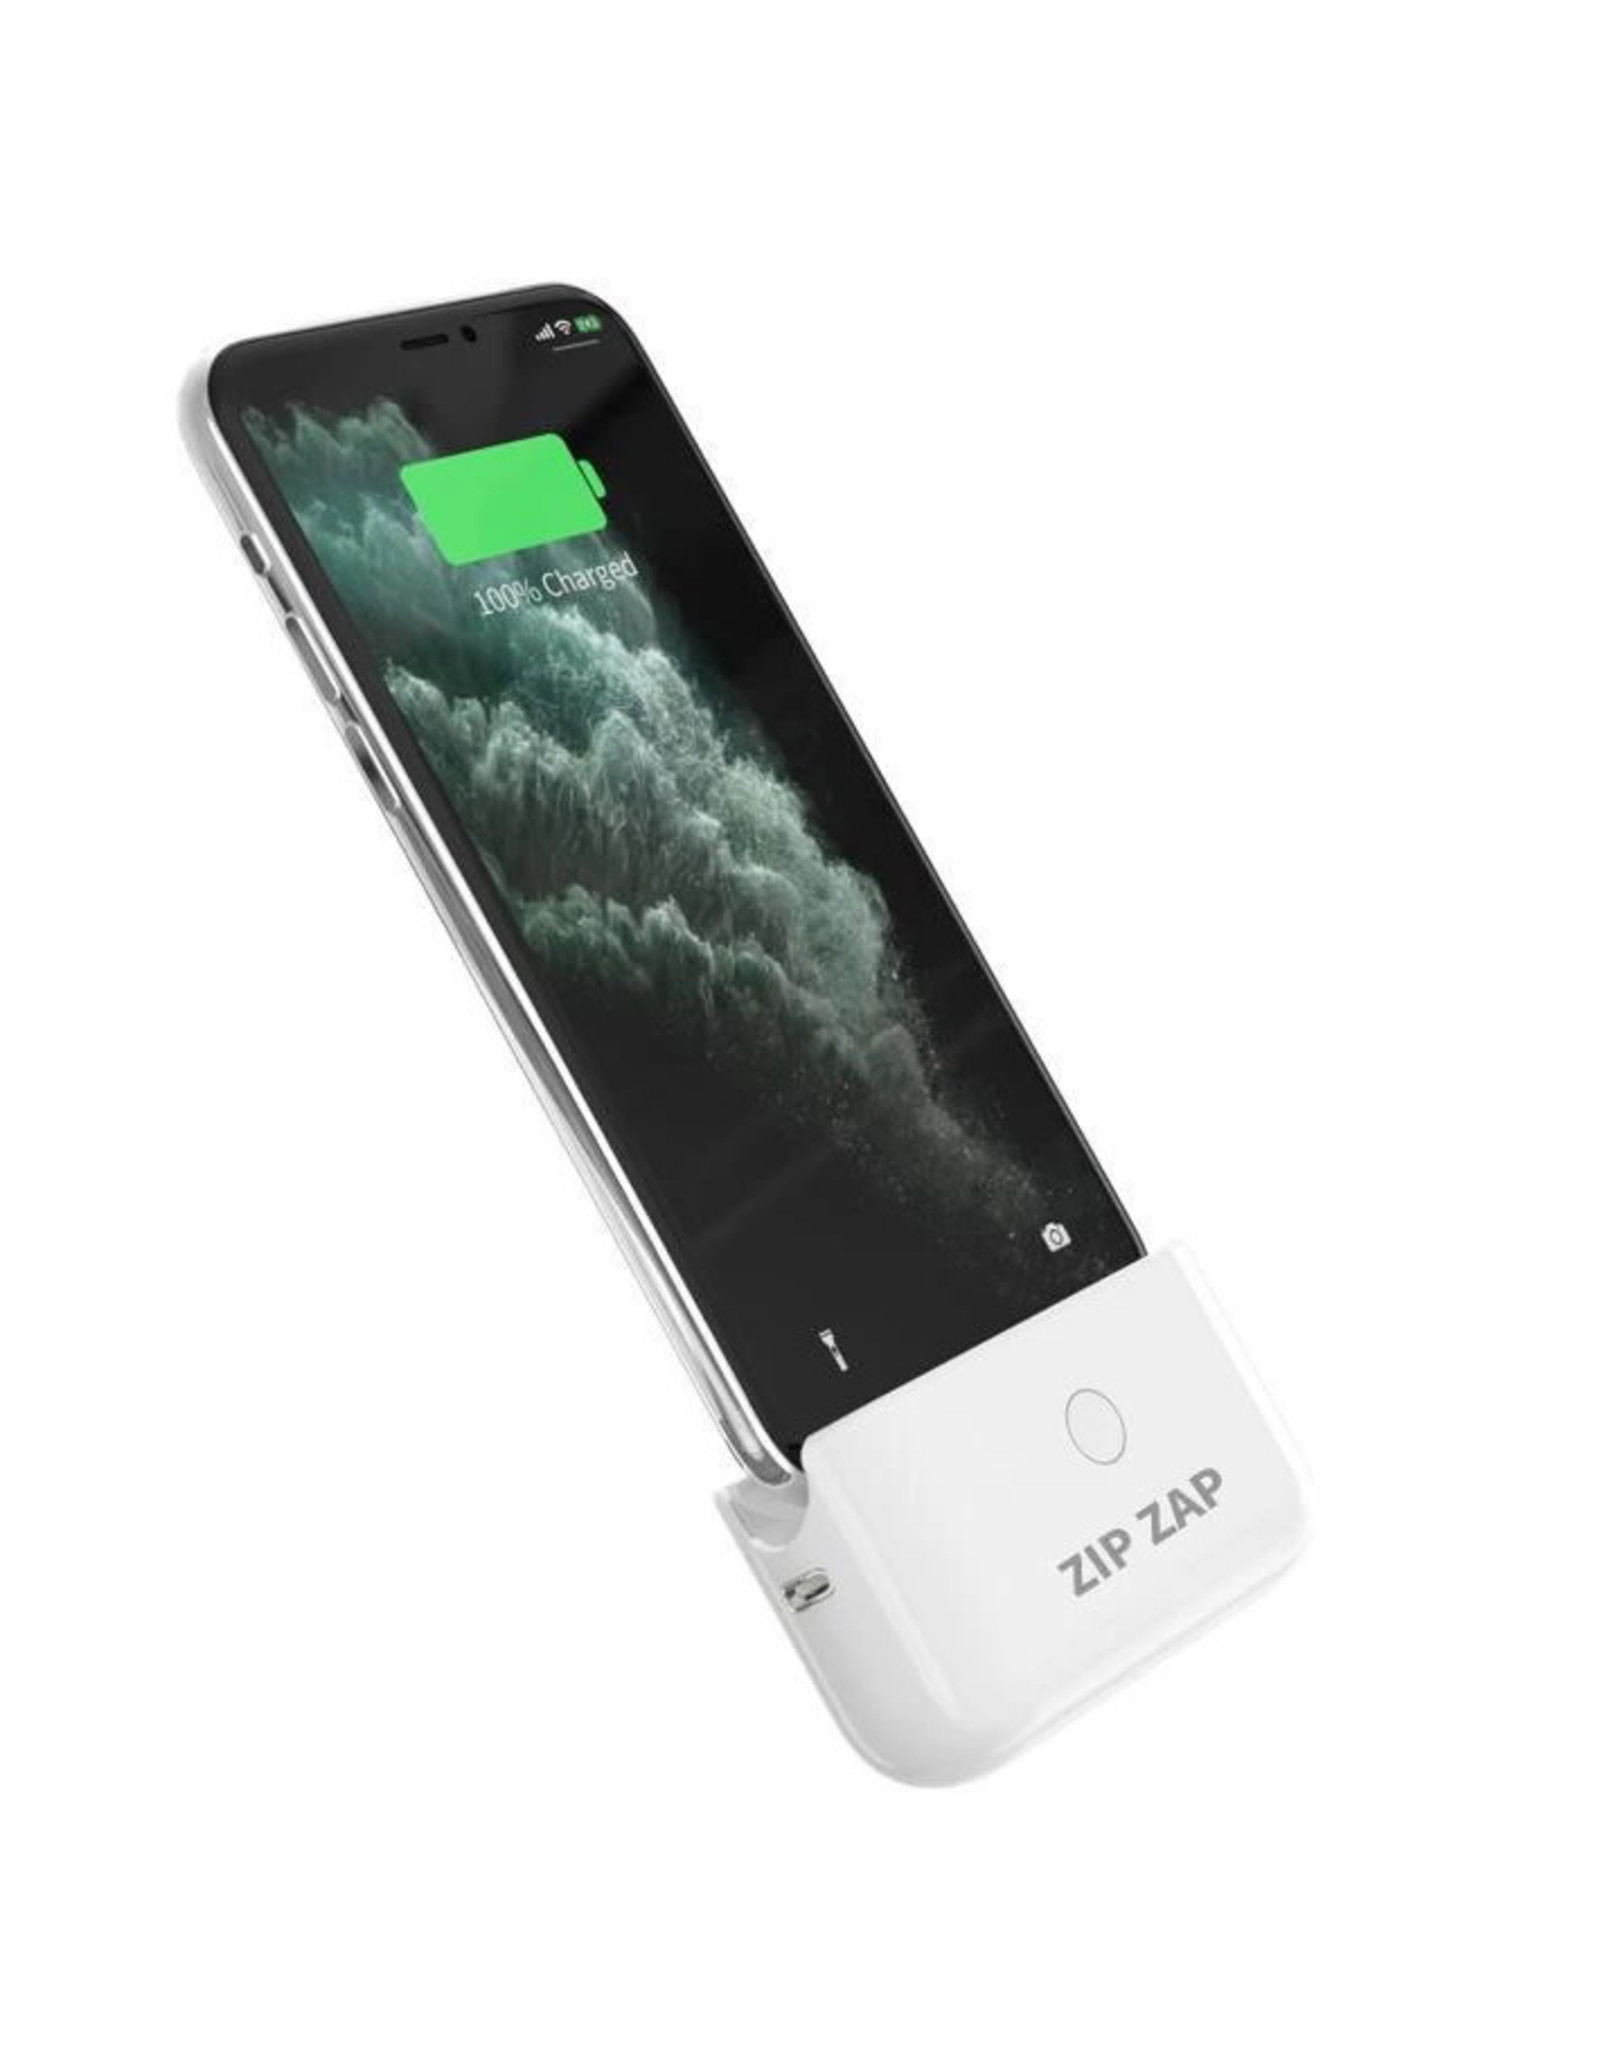 Zip Zap Zip Zap Cableless Portable Charger for iOS devices with a lightning connector